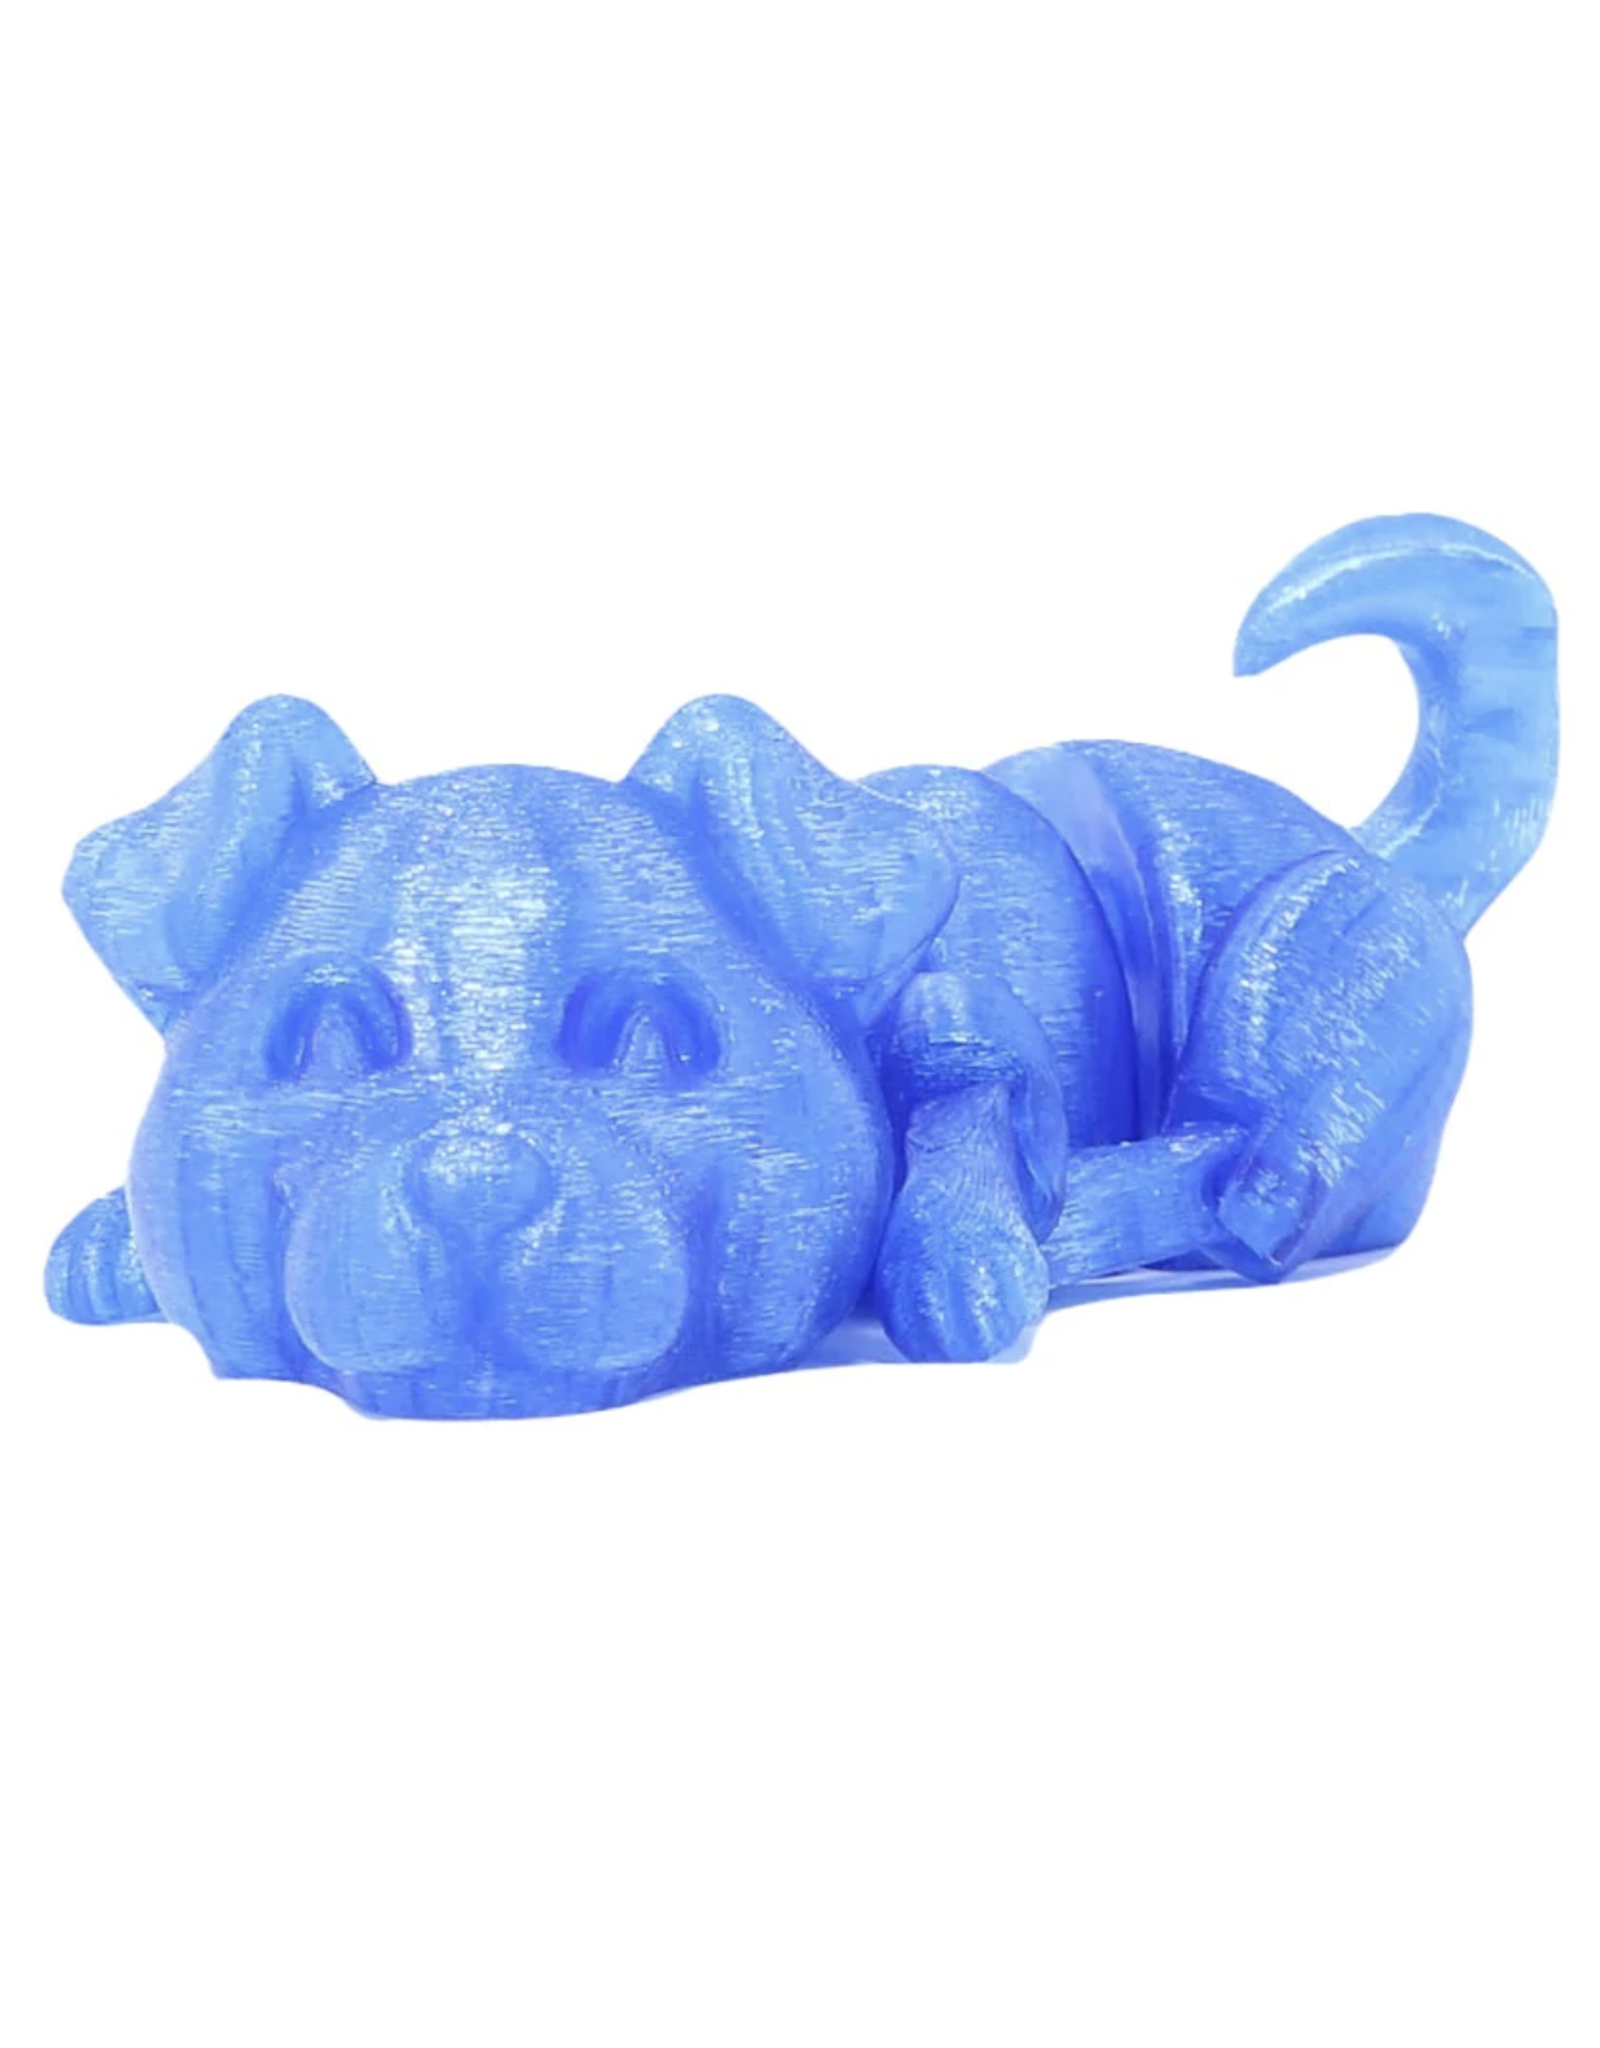 Curious Critters 3D Printed Fidget Assorted - Large